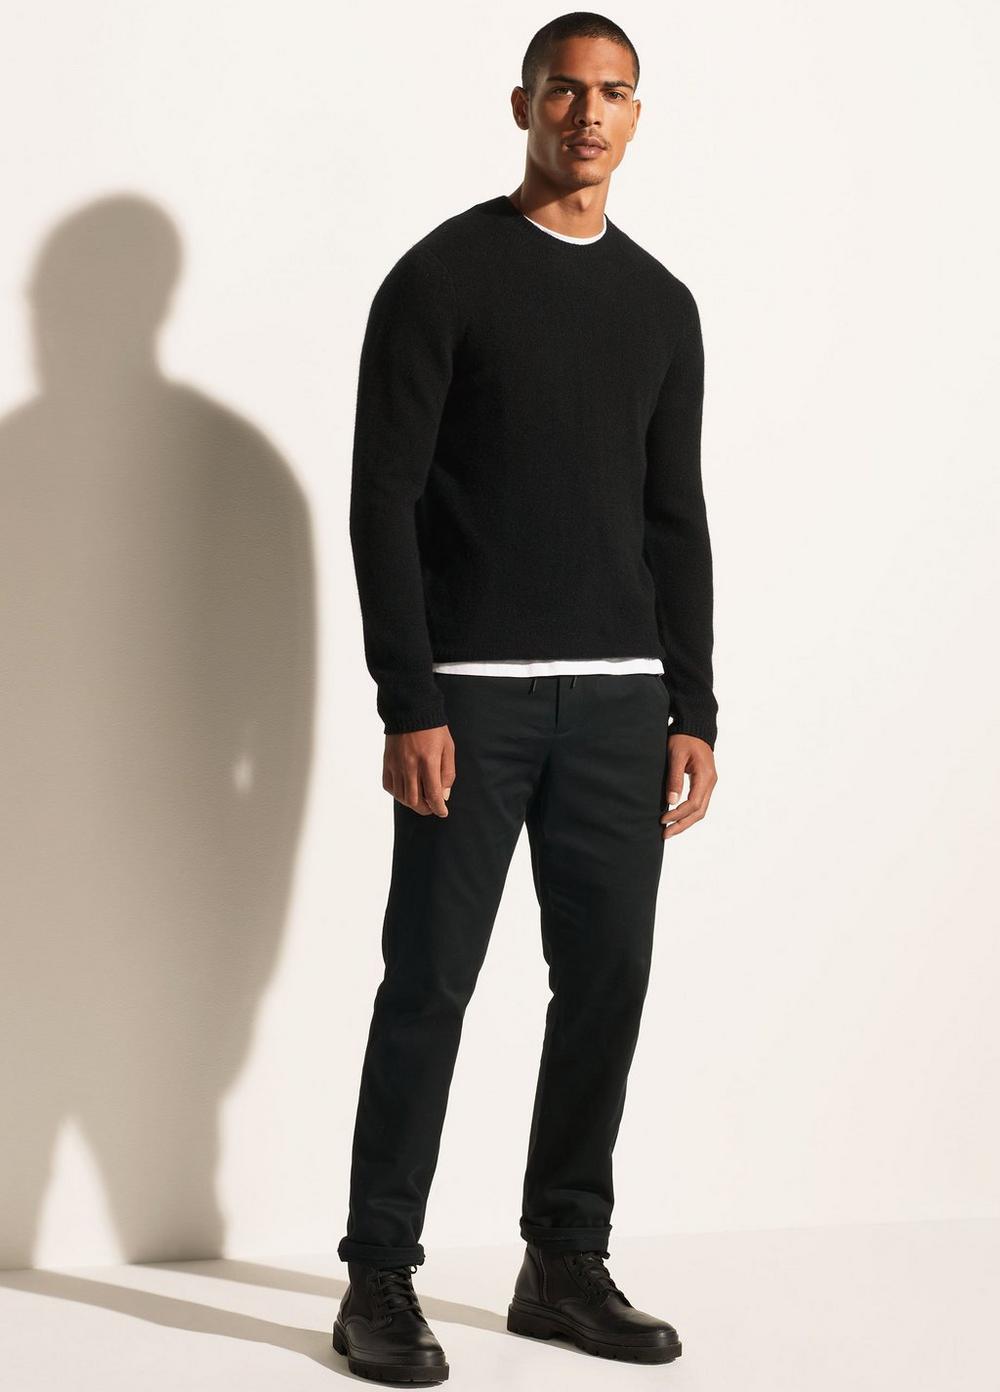 Cashmere Long Sleeve Crew